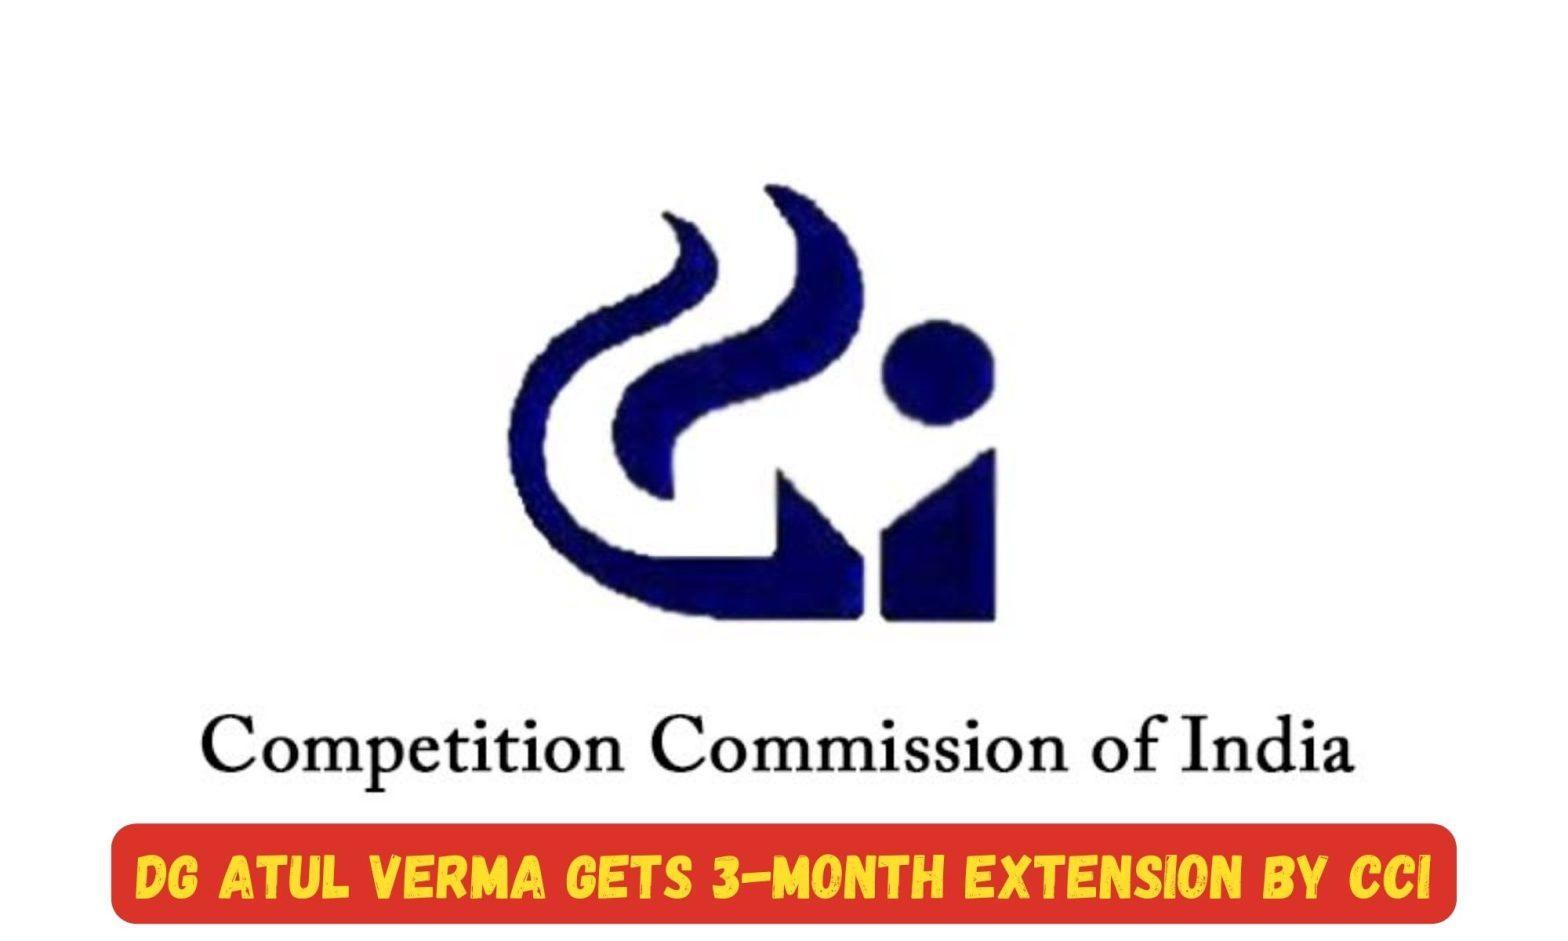 DG Atul Verma gets 3-month extension by CCI